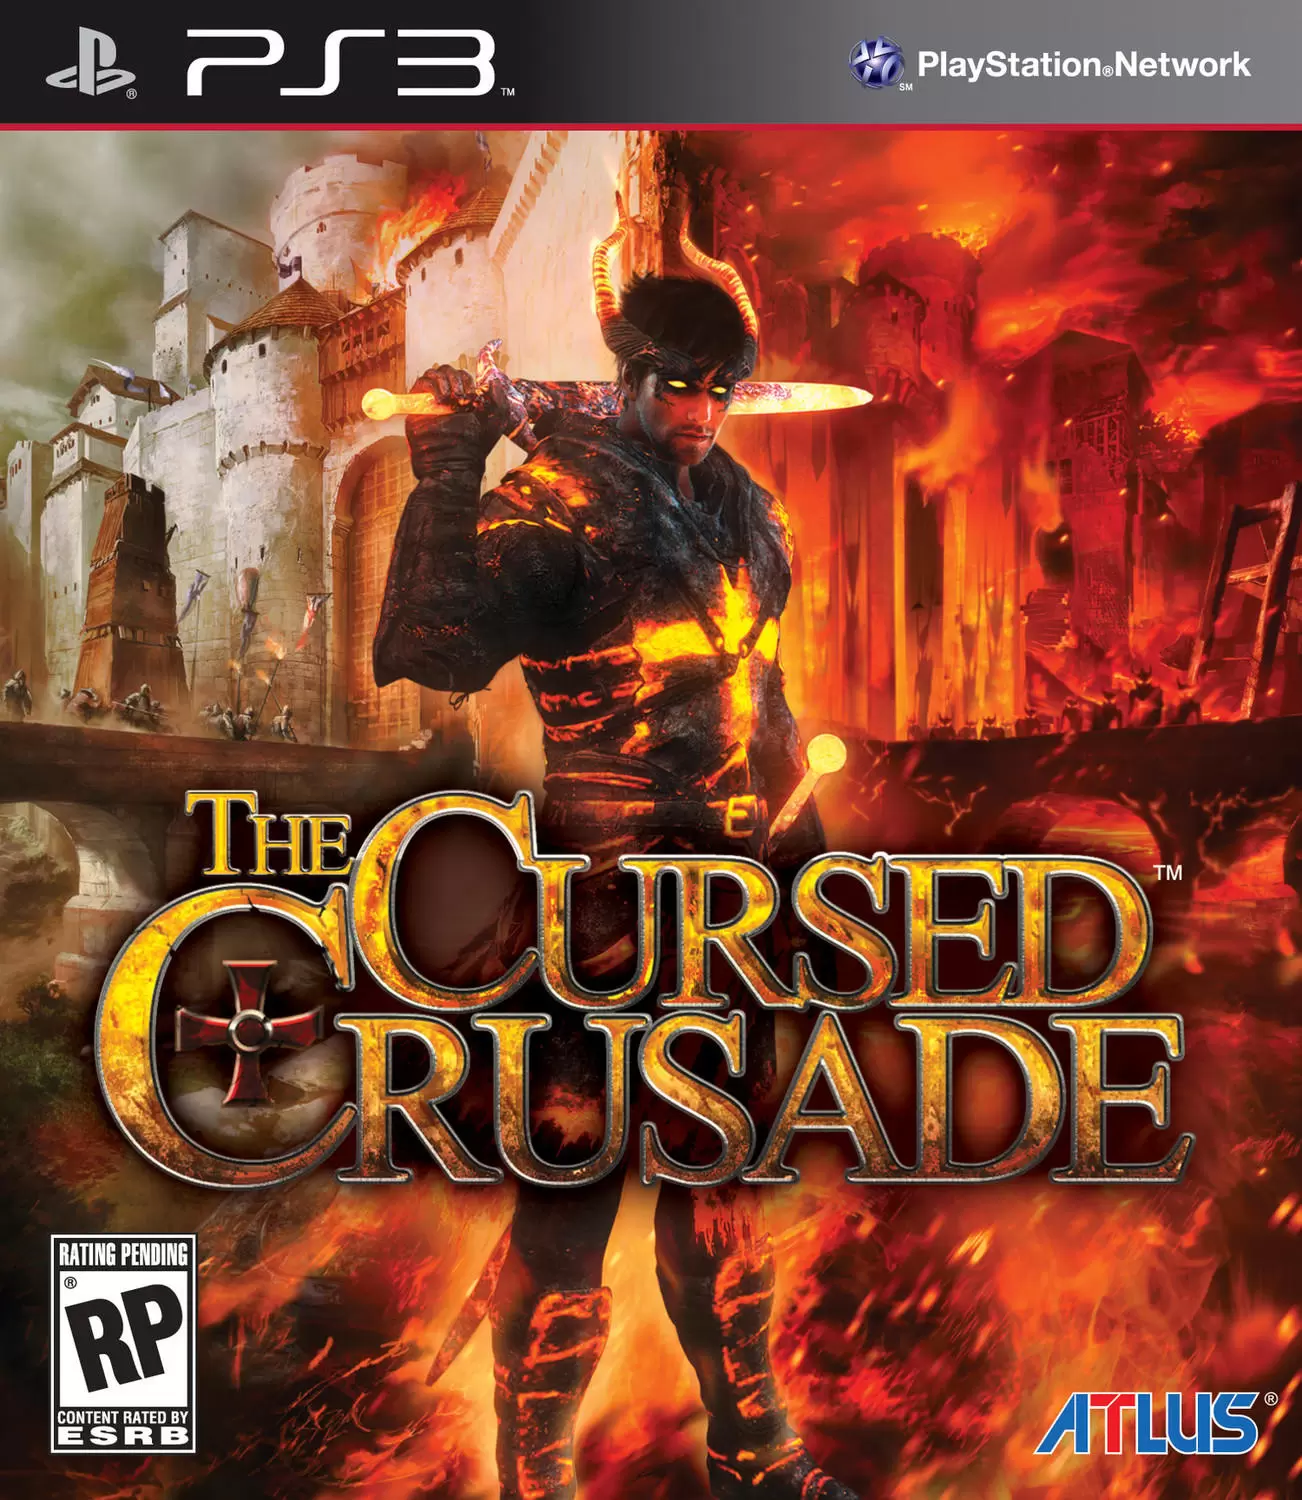 PS3 Games - The Cursed Crusade